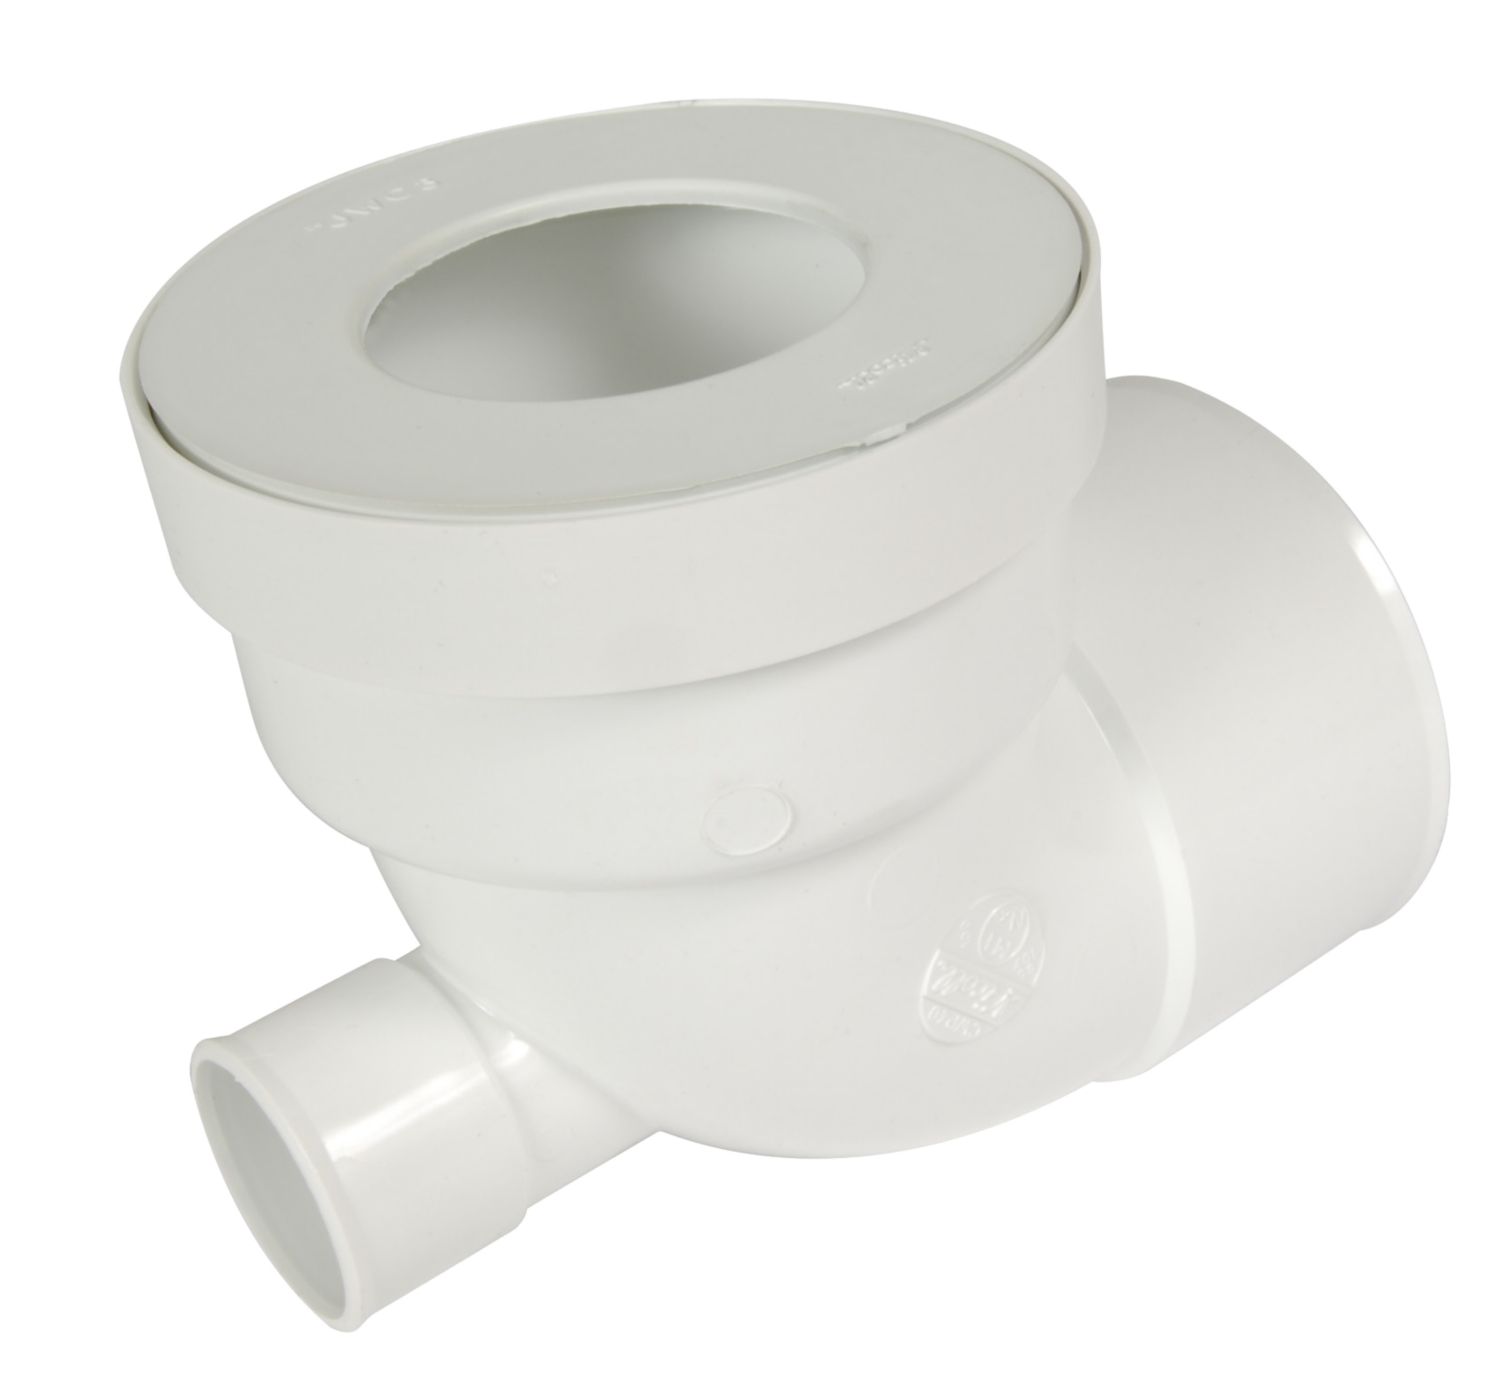 Pipe WC courte femelle avec piquage UCWP40 Nicoll